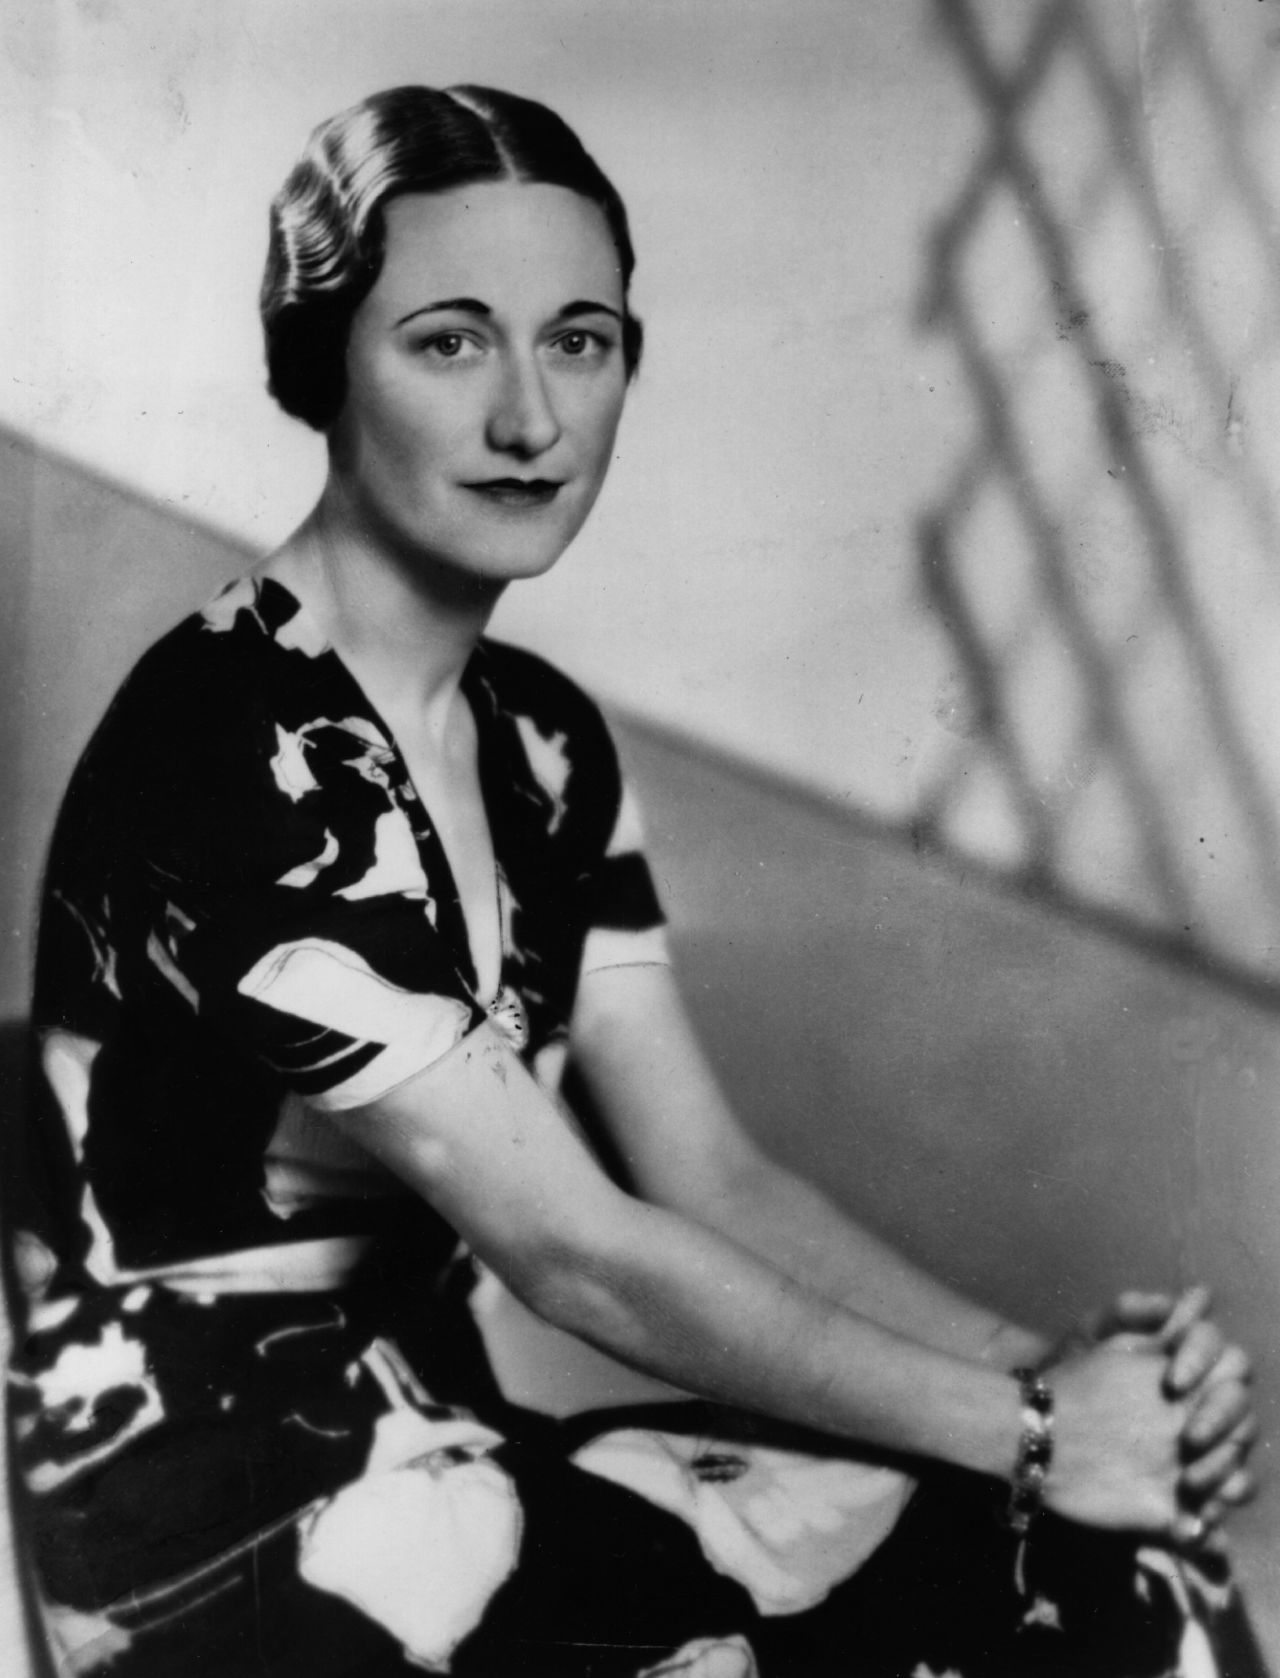 Britain's King Edward VIII tells the nation he has abdicated to marry American socialite and divorcee Wallis Simpson, pictured, on December 11, 1936. His brother immediately succeeds him as King George VI.